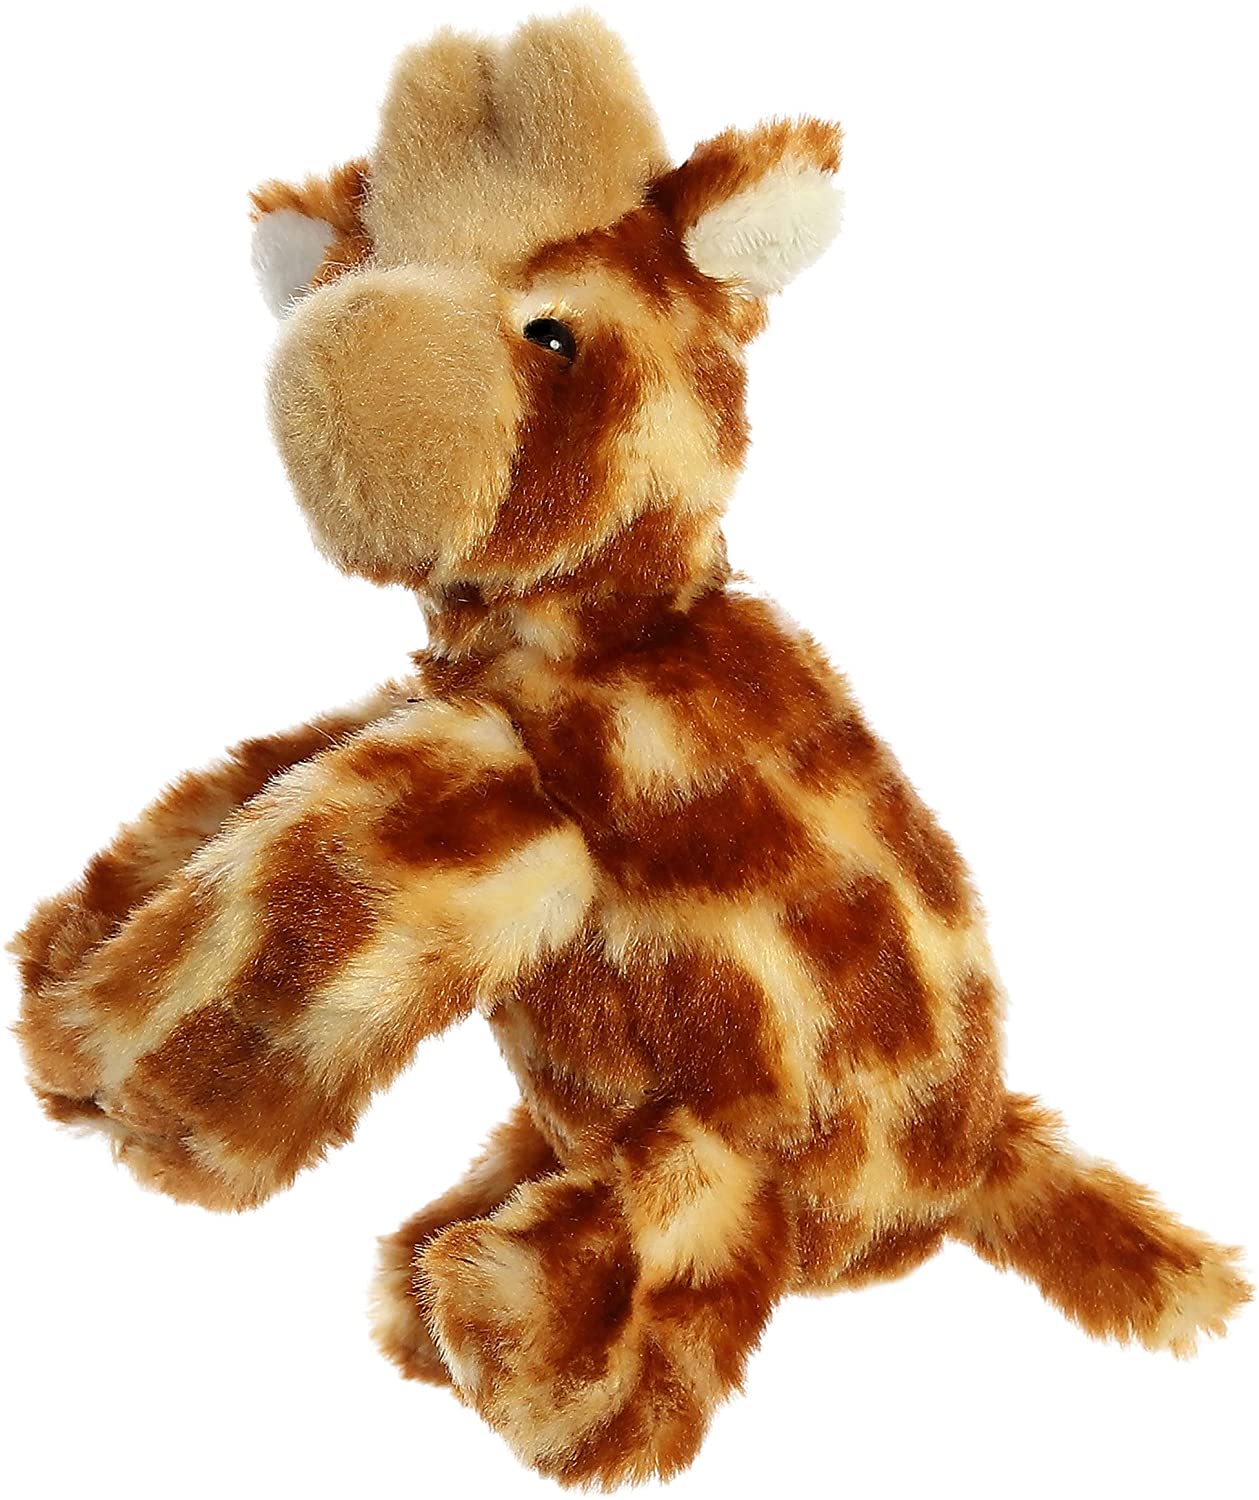 Wristamals. Soft, cuddly, take anywhere, these critters will become your childs' new best friend! Choose from Monkey, Sloth, Lion or Giraffe. 9 inches in size. High quality materials make for a soft and fluffy touch. Quality materials for a soft cuddling experience Hook and Loop Velcro on the arms. Portable and stylish